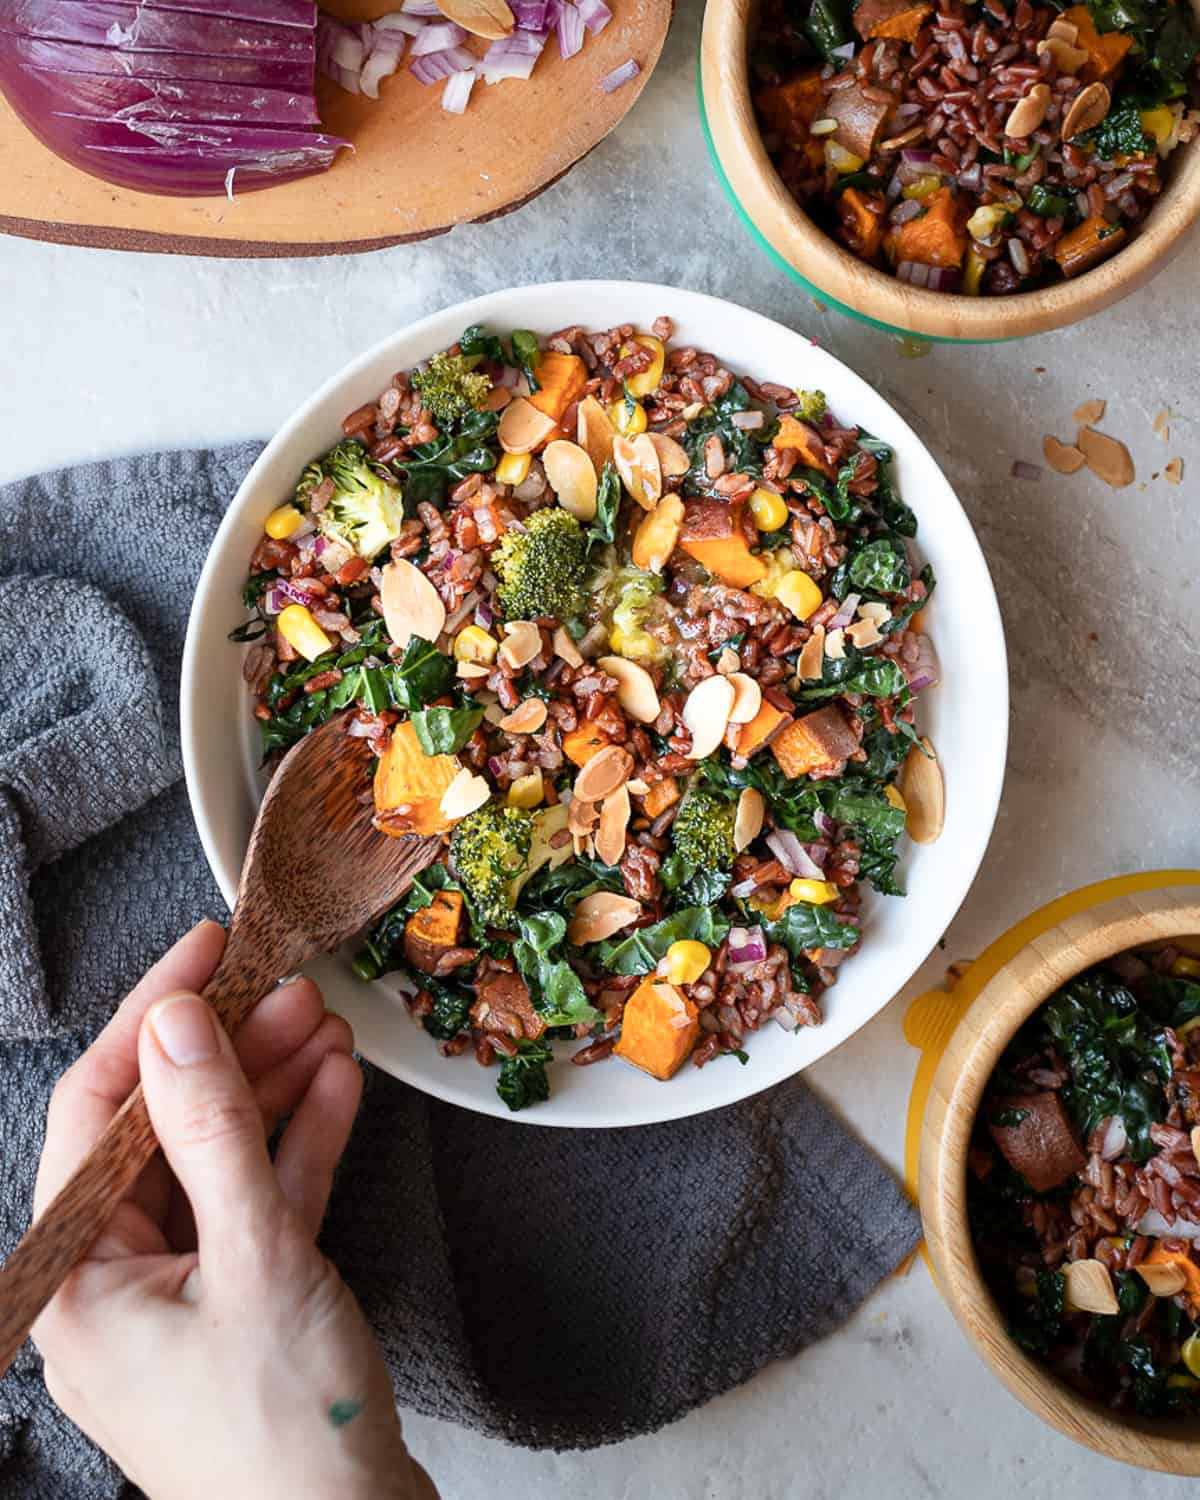 Top down image image of a bowl of roasted veg and red rice salad topped in a gluten free salad dressing. The image shows a human hand with a spoon mixing the salad.